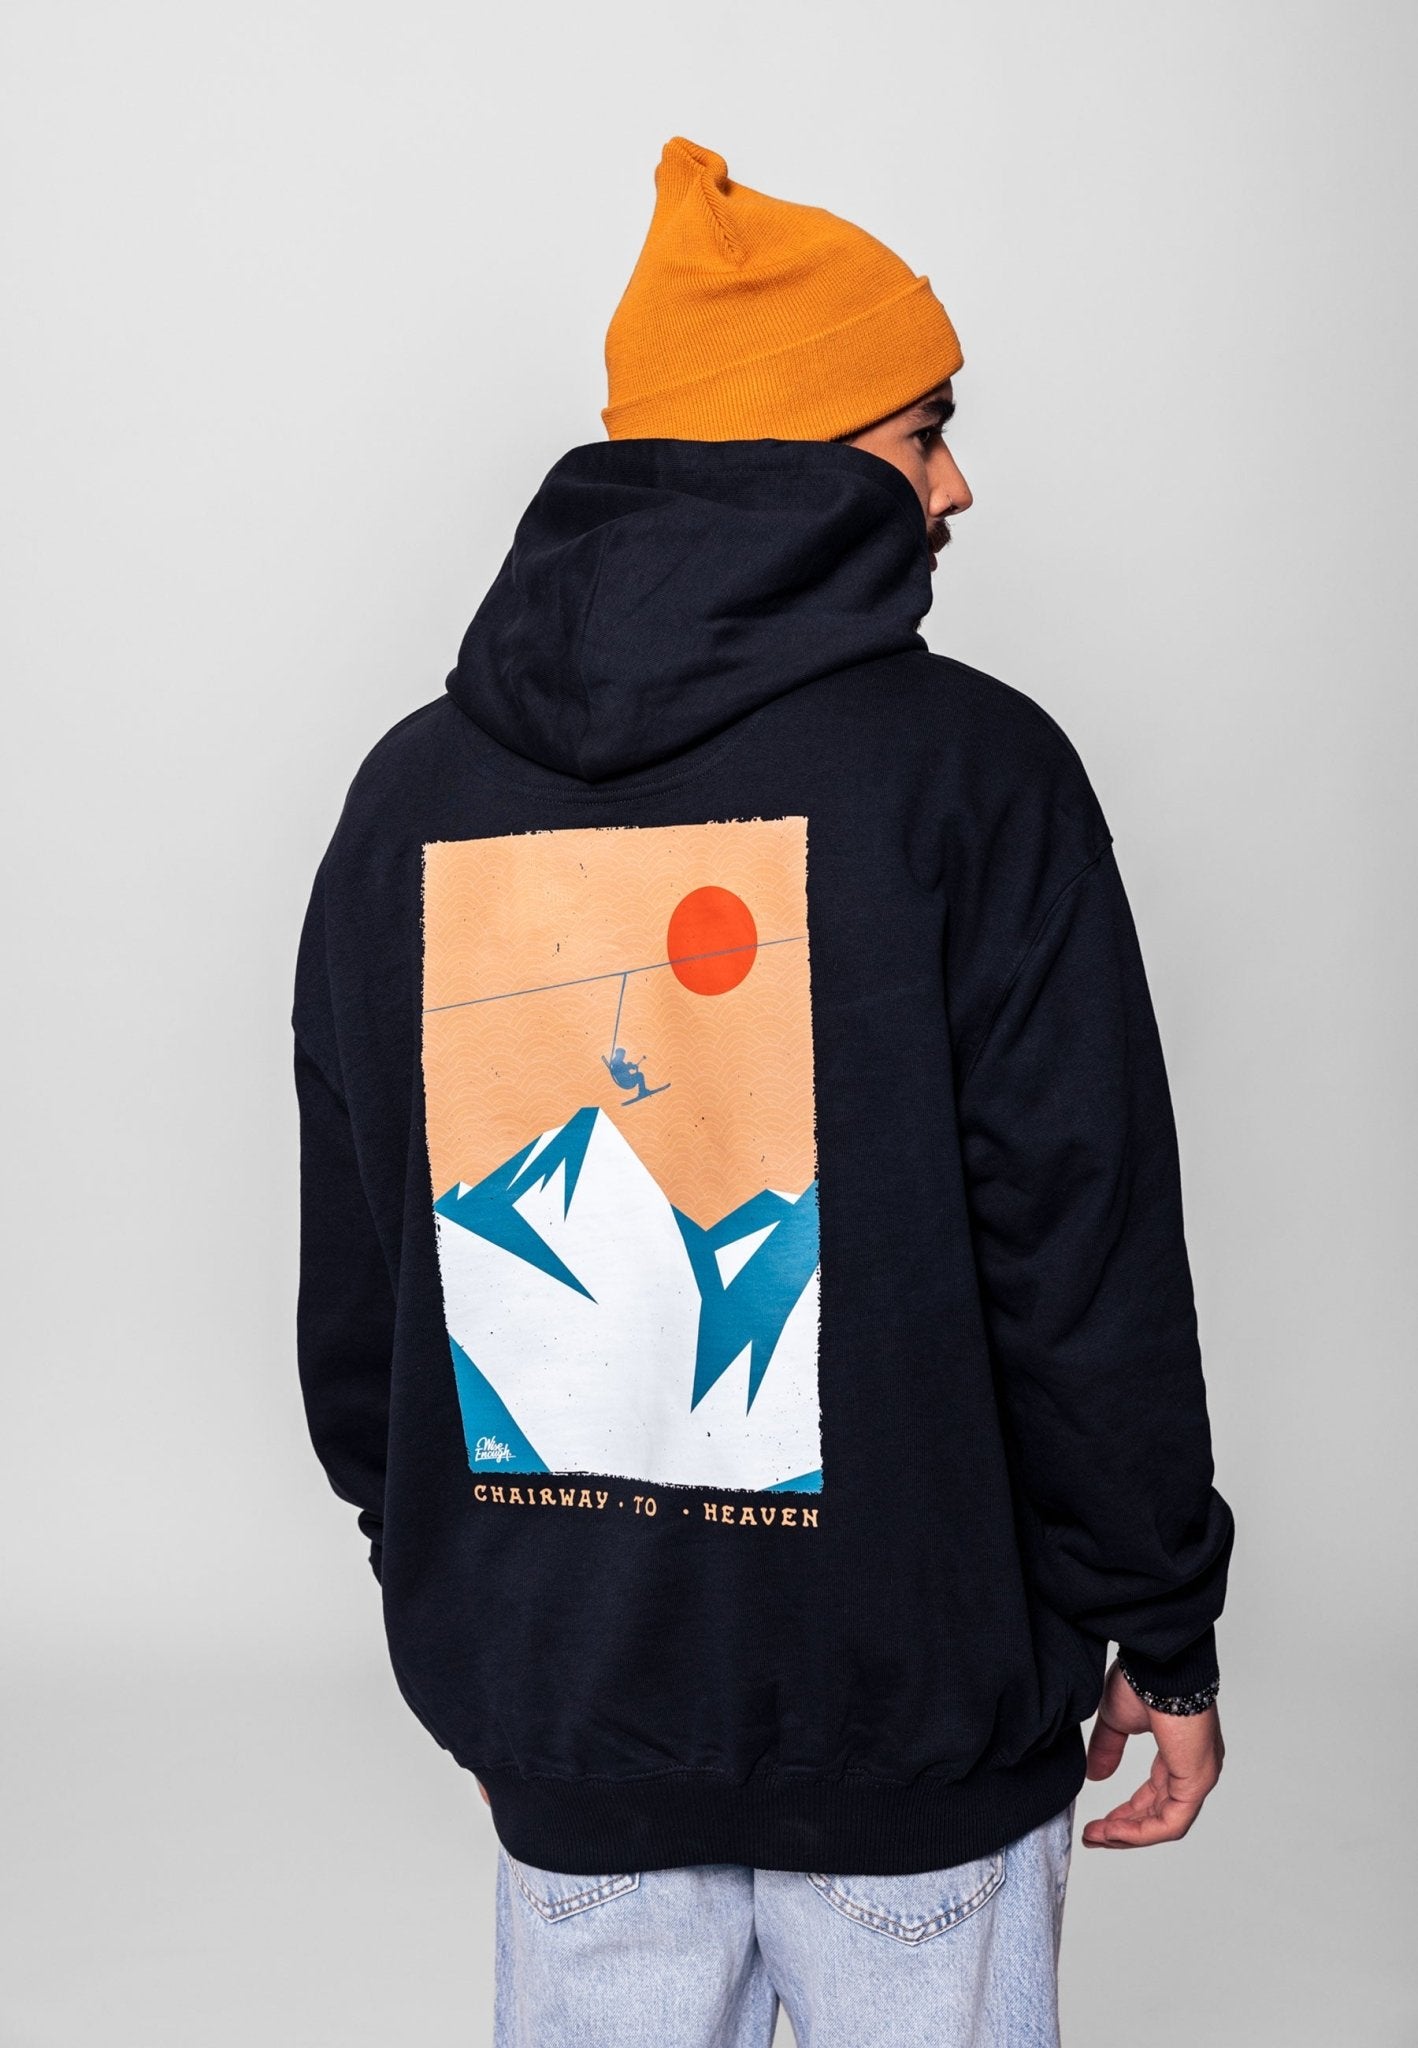 Oversized Hoodie Chairway to heaven - wise enough